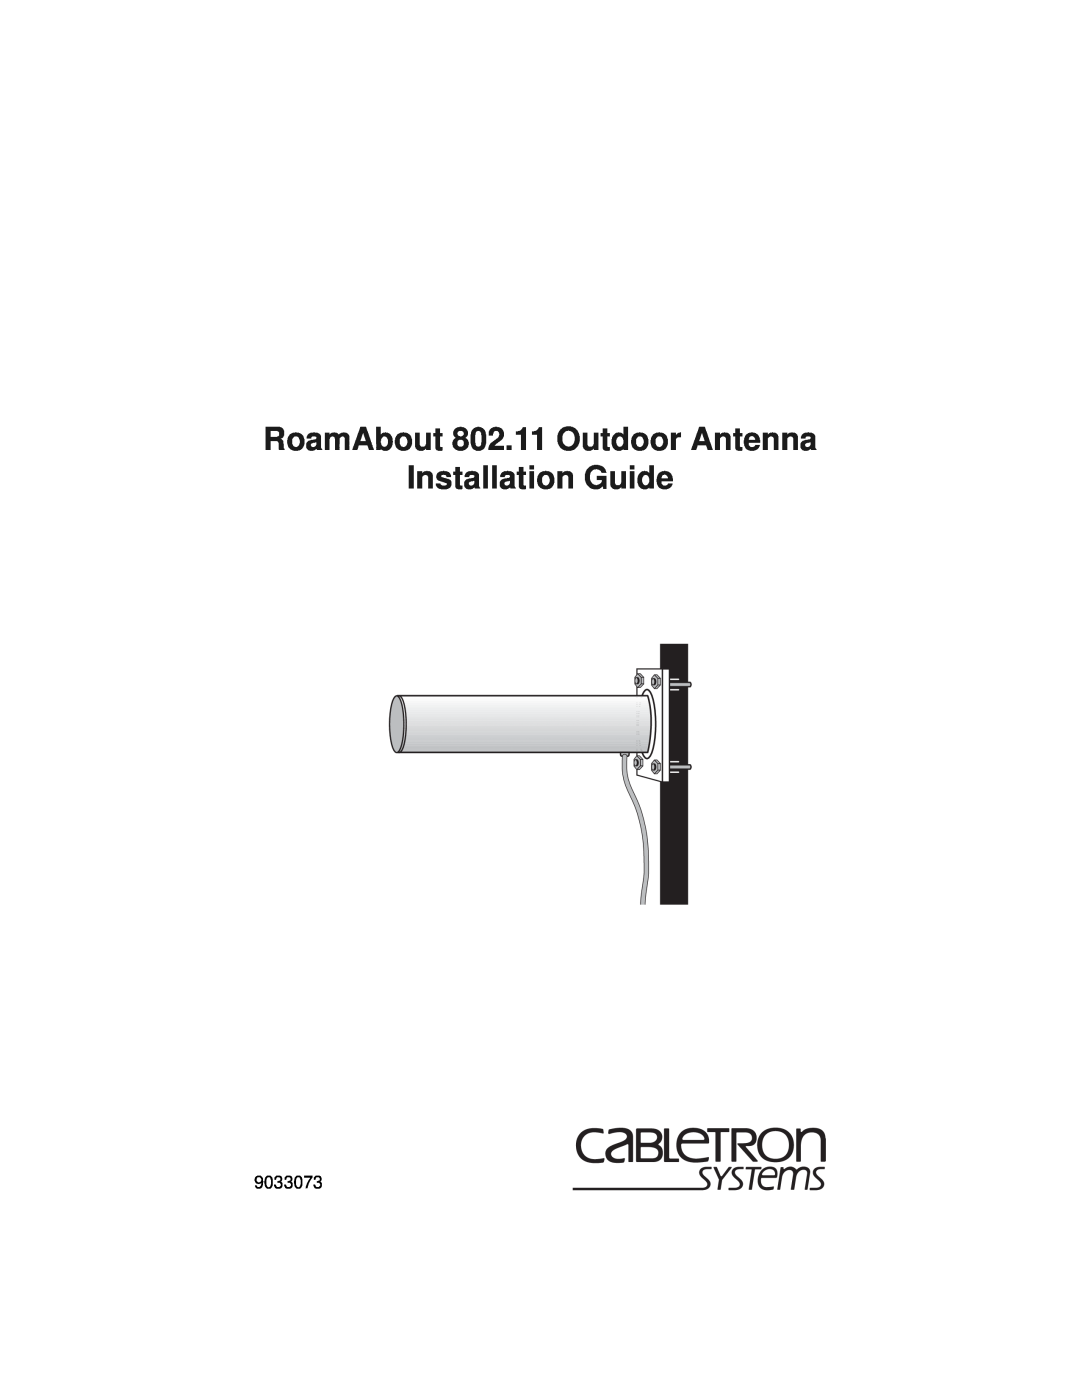 Cabletron Systems 9033073 manual RoamAbout 802.11 Outdoor Antenna, Installation Guide 